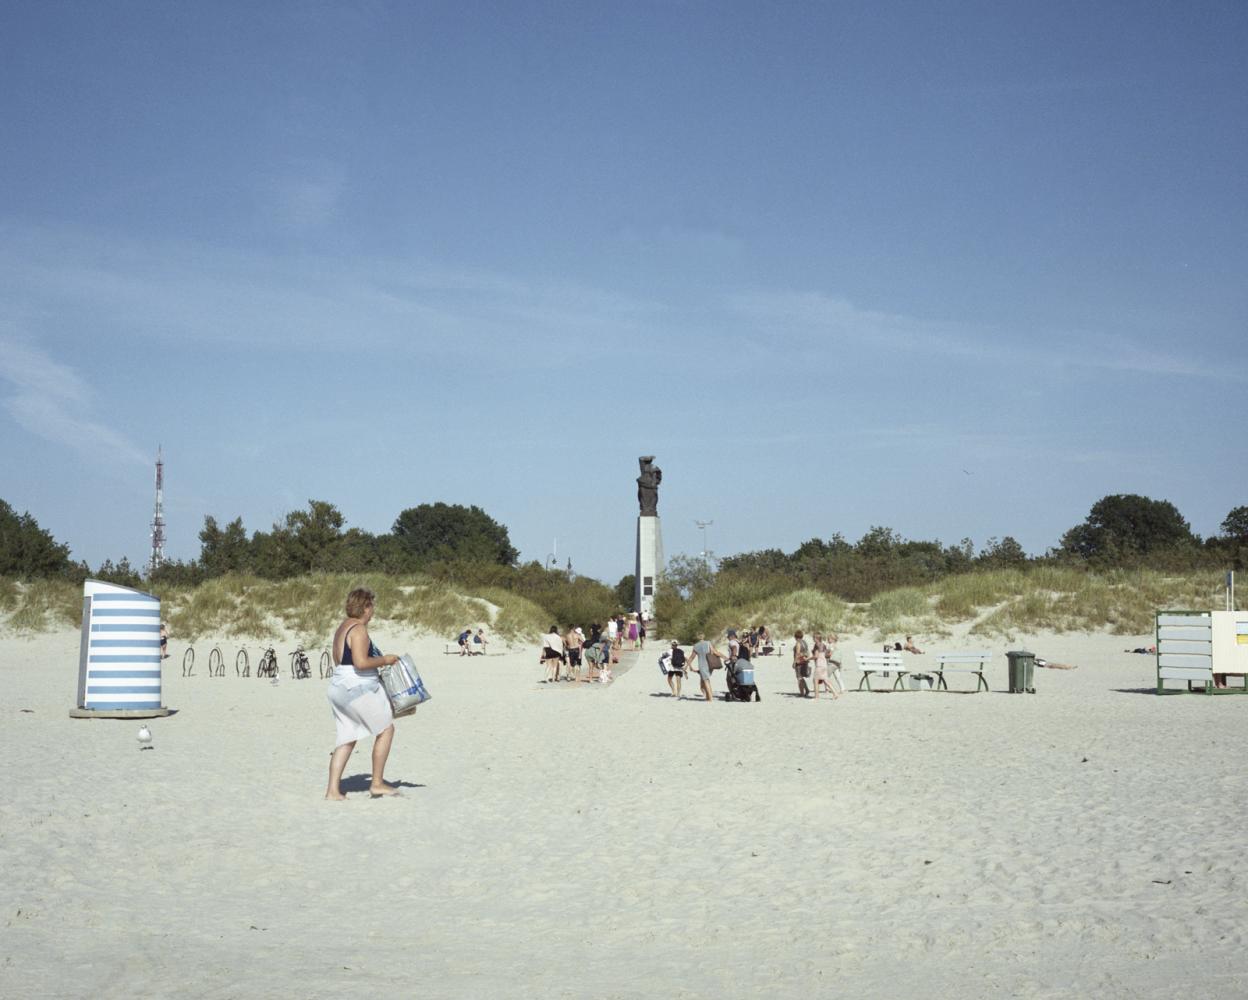  Latvia, Liepaja. August 2020. A view of Liepaja beach. In 1944, during the Second World War, German Nazis and Latvian collaborators exterminated the local Jewish population, which had numbered about 7,000 before the war. During the period 1944â€“1945, as the Soviet Union began its offensive to the Baltic Sea, Liepāja was within the "Courland Pocket". It was occupied by the Red Army on 9 May 1945. Thousands of Latvians fled as refugees to Germany. The city had been devastated during the war, and most of the buildings and industrial plant were destroyed. On 25â€“29 March 1949, the Soviet Union organized a second mass deportation to Siberia from Liepāja. Under the Soviet Union government, Liepaja became a military base city where to enter the city it was necessary a special permit. 